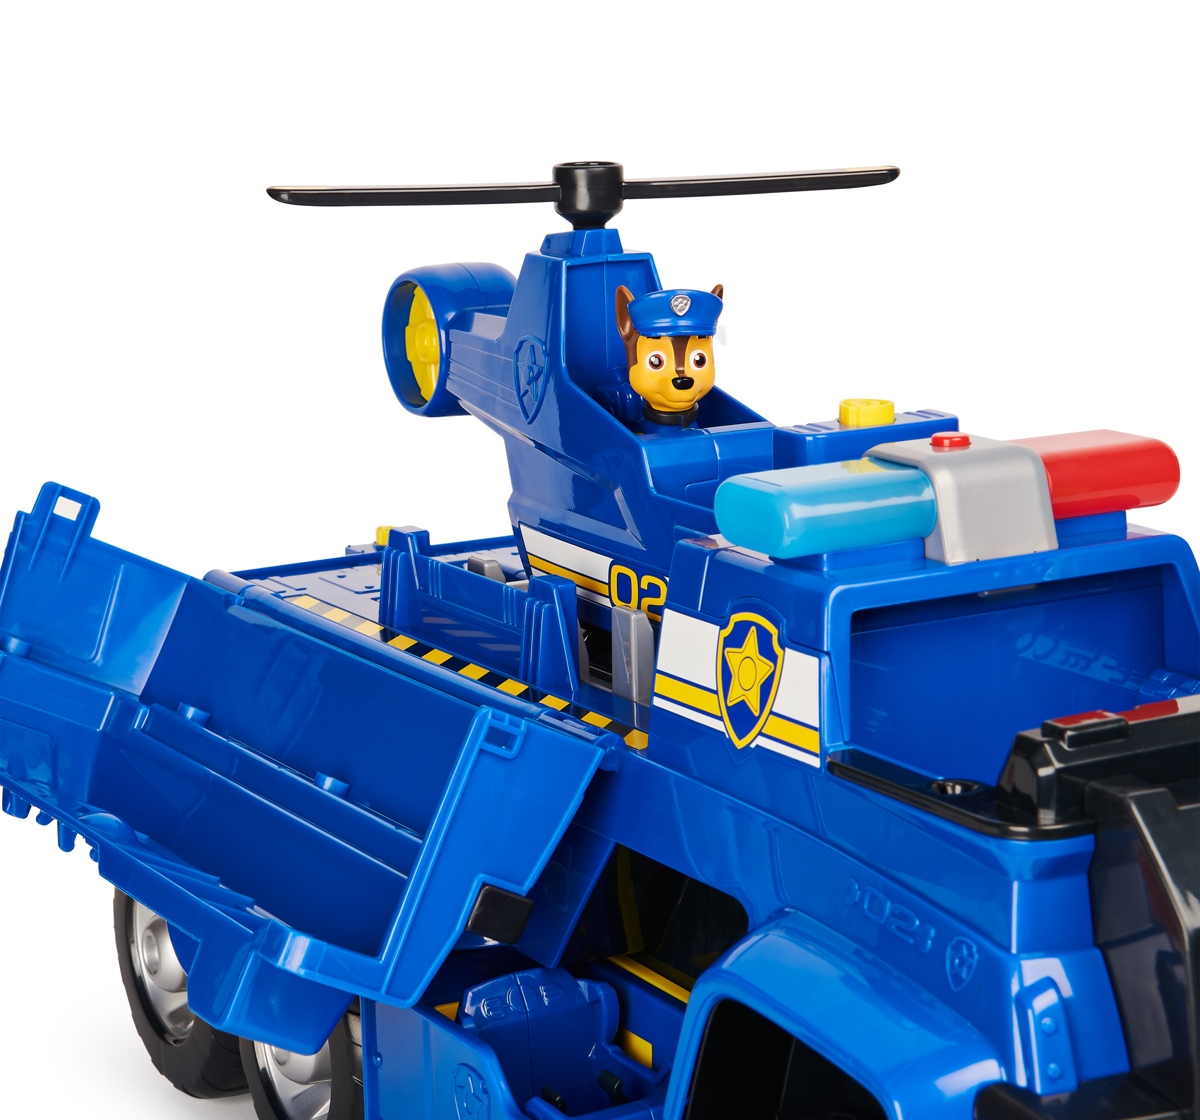 Paw Patrol | Paw Patrol Chase Dluxe Cruser Roleplay Set for Kids 3Y+, Blue 4